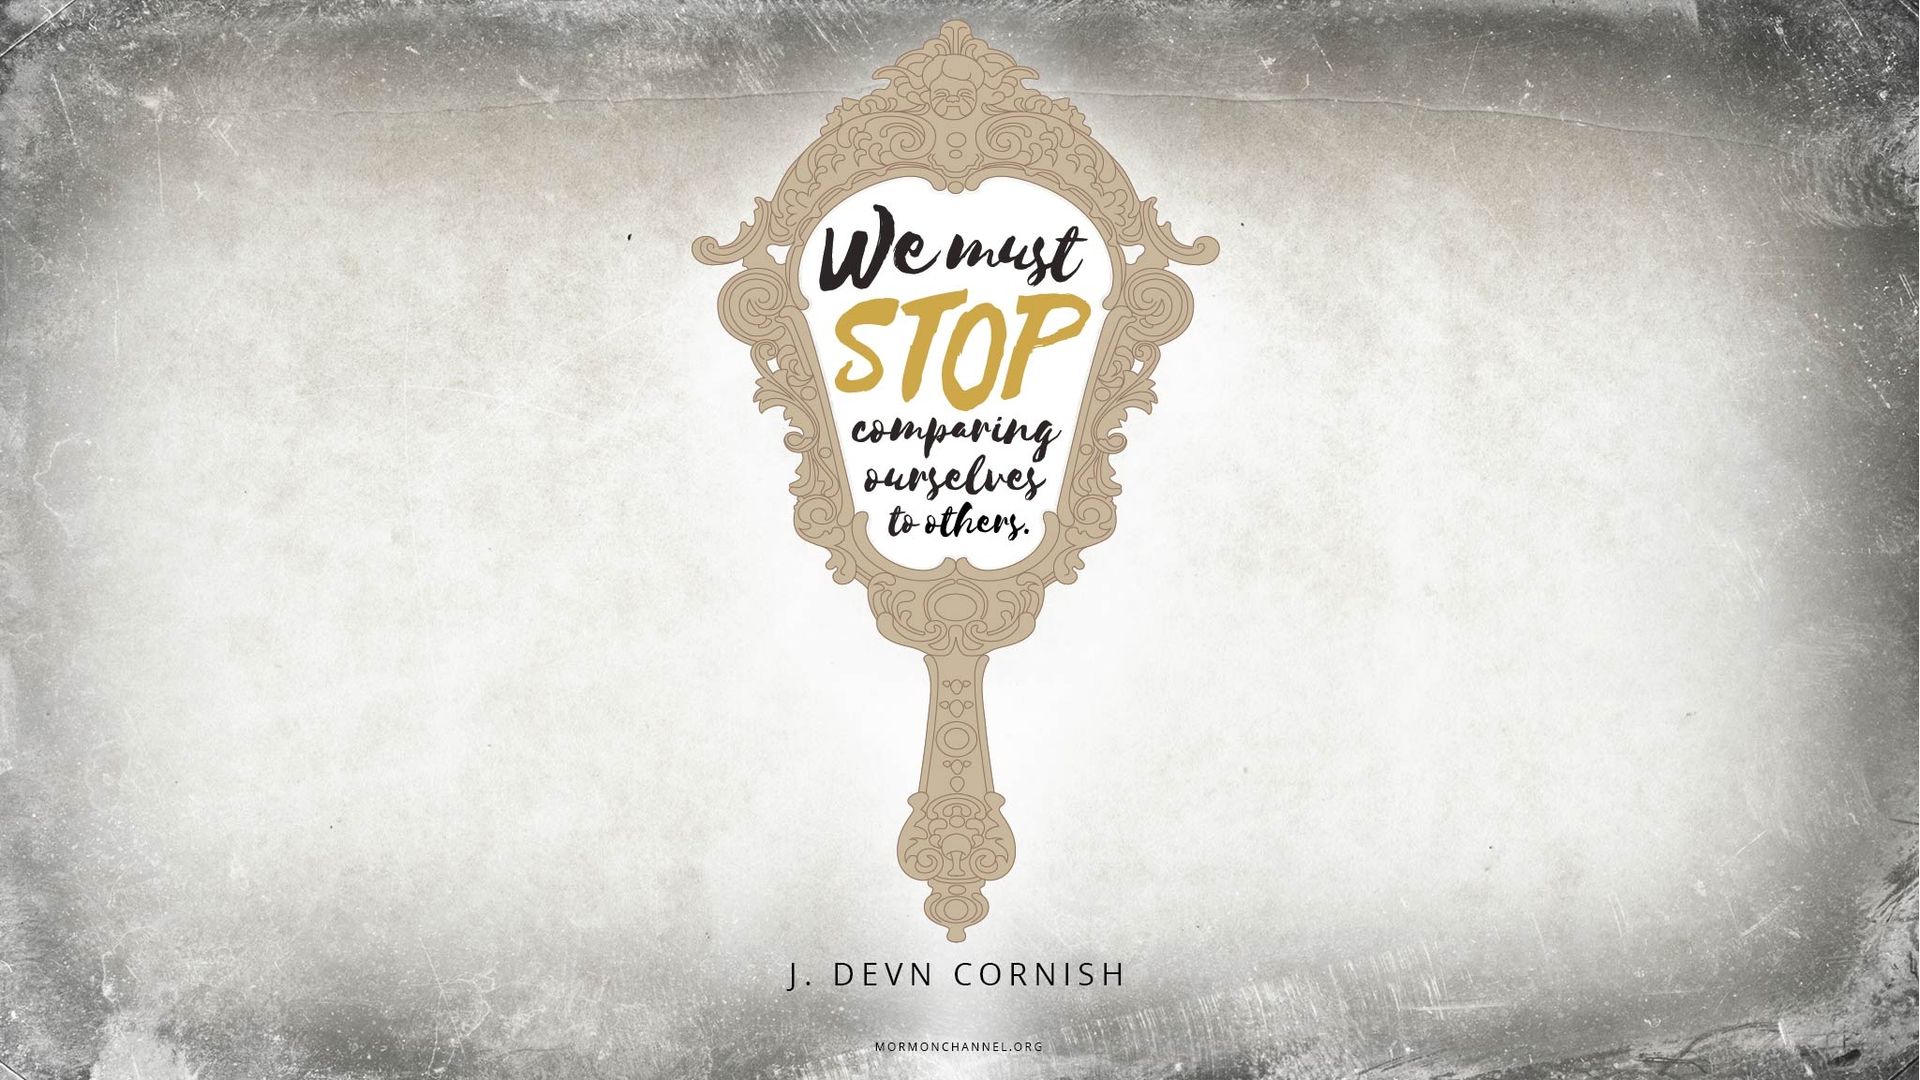 “We must stop comparing ourselves to others.”—Elder J. Devn Cornish, “Am I Good Enough? Will I Make It?” © undefined ipCode 1.